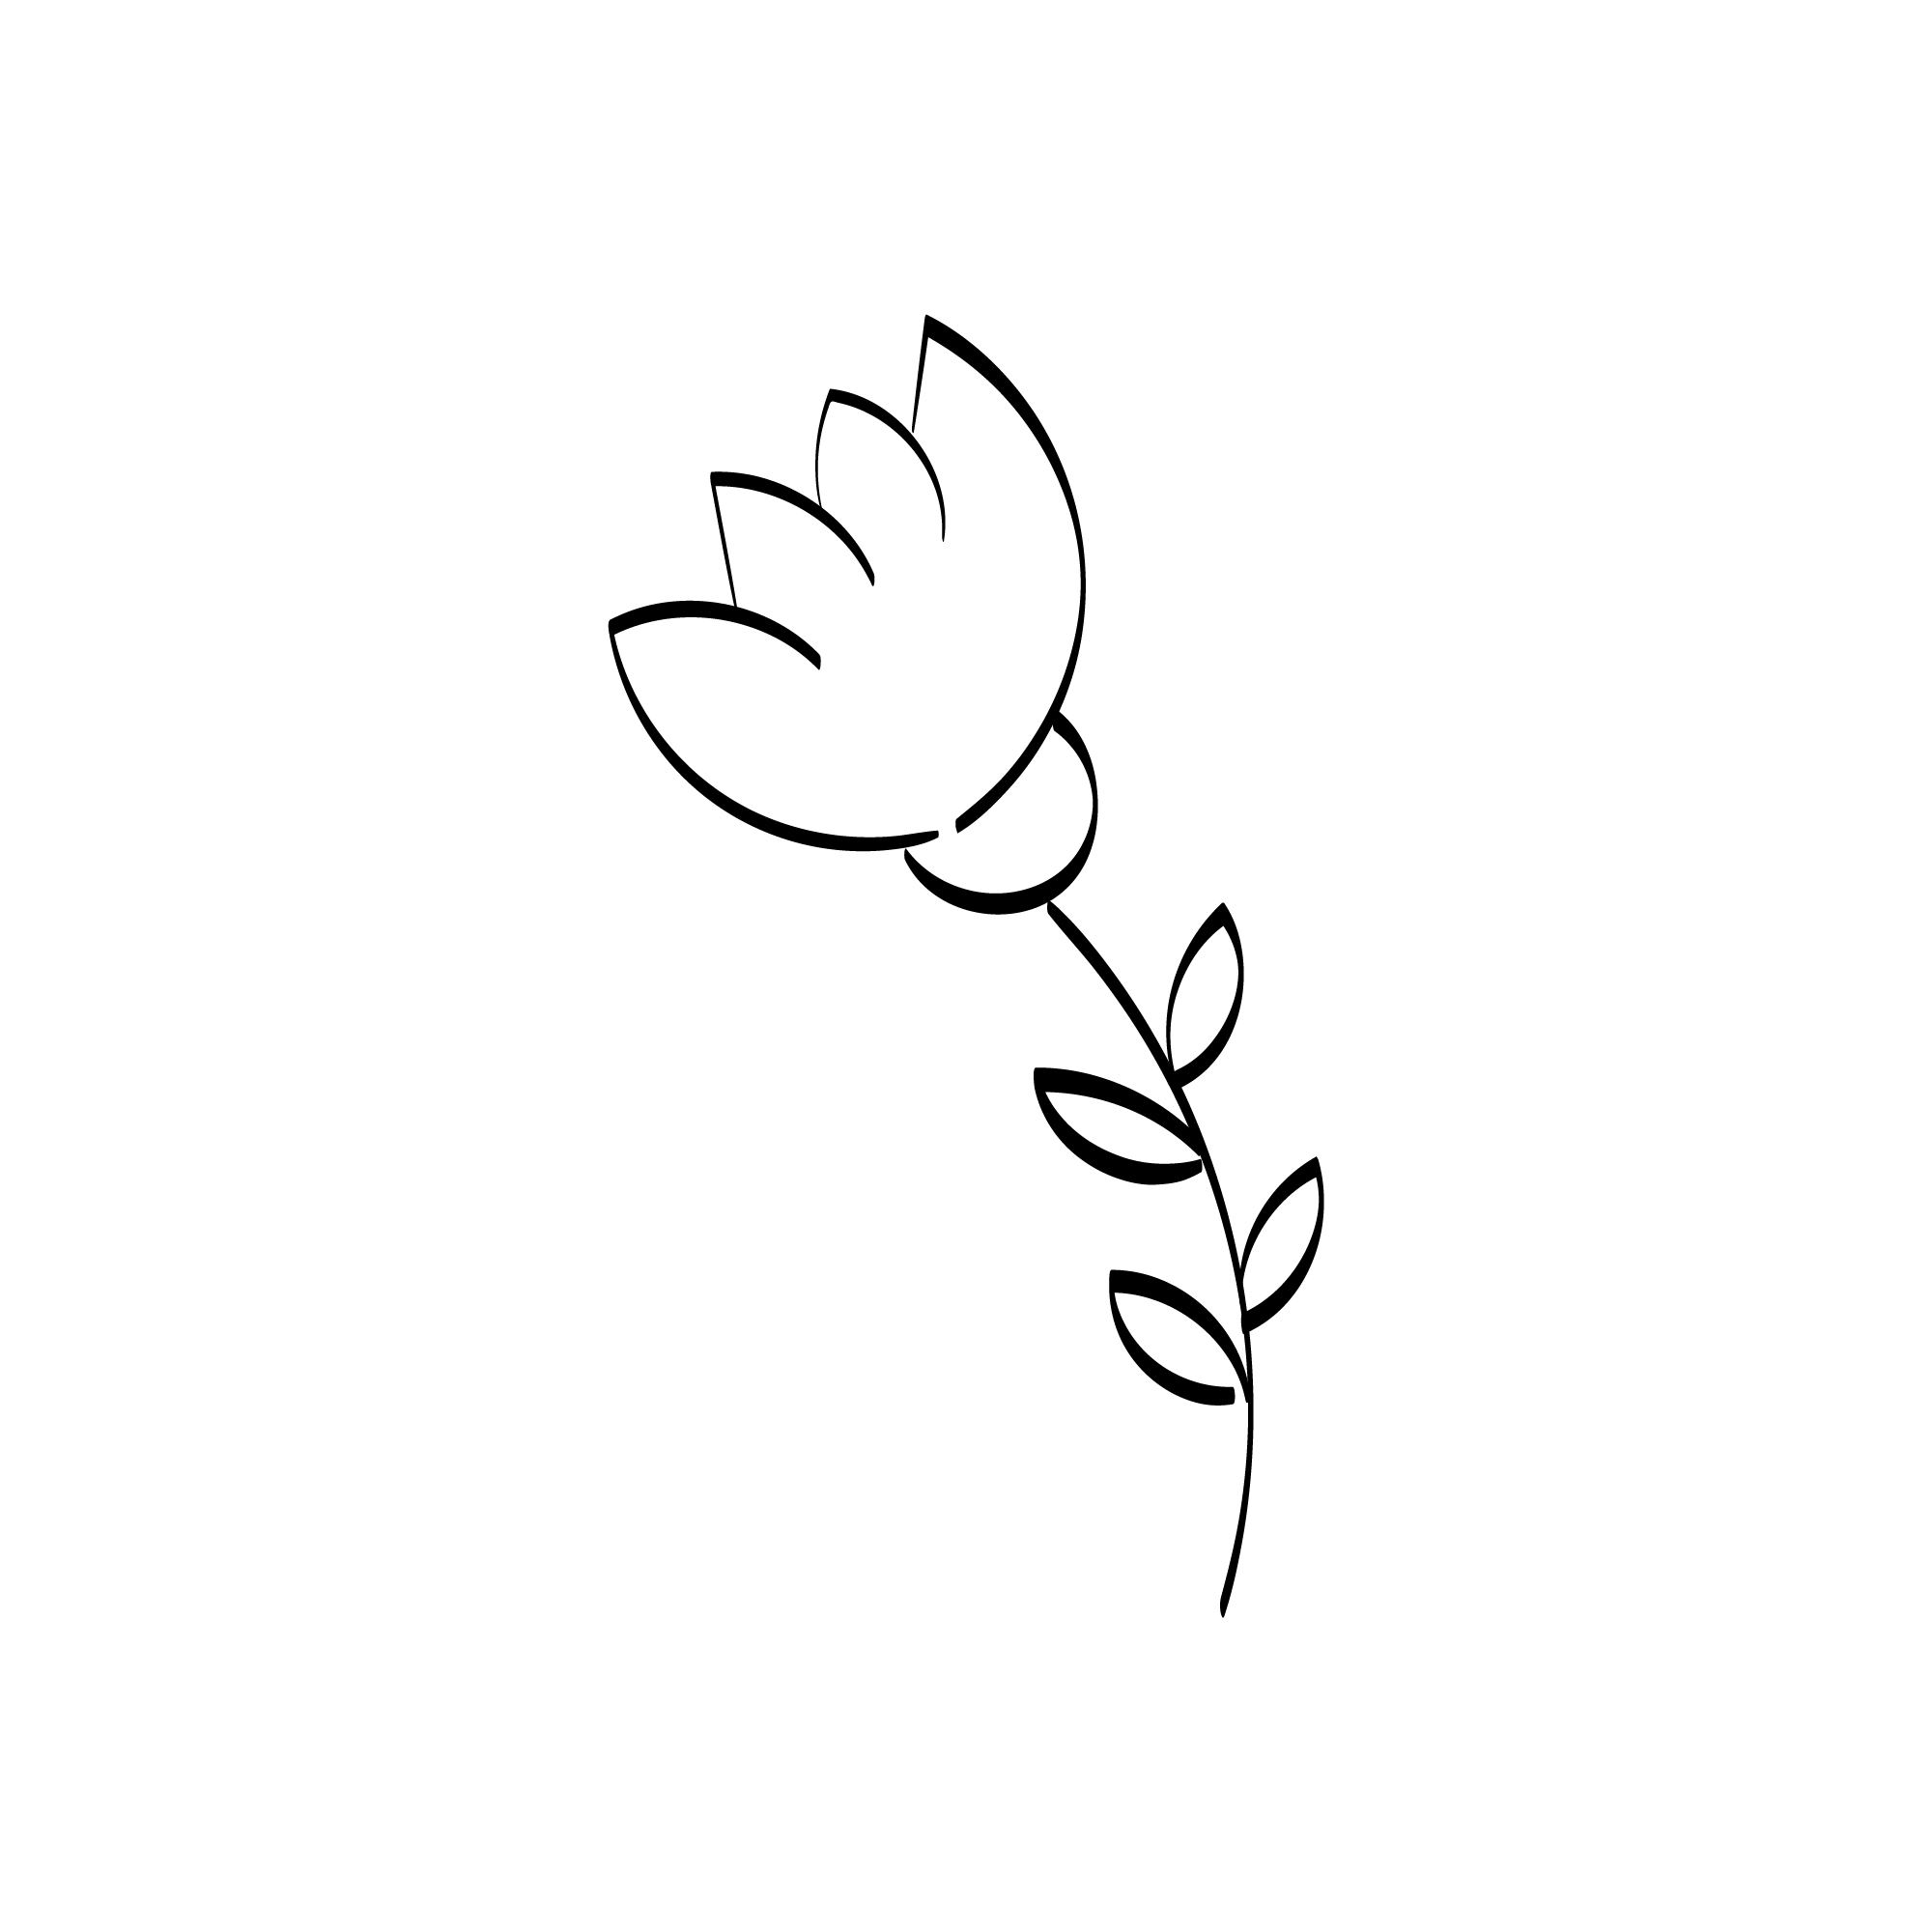 Floral Art Drawing with Line-art Preview image.